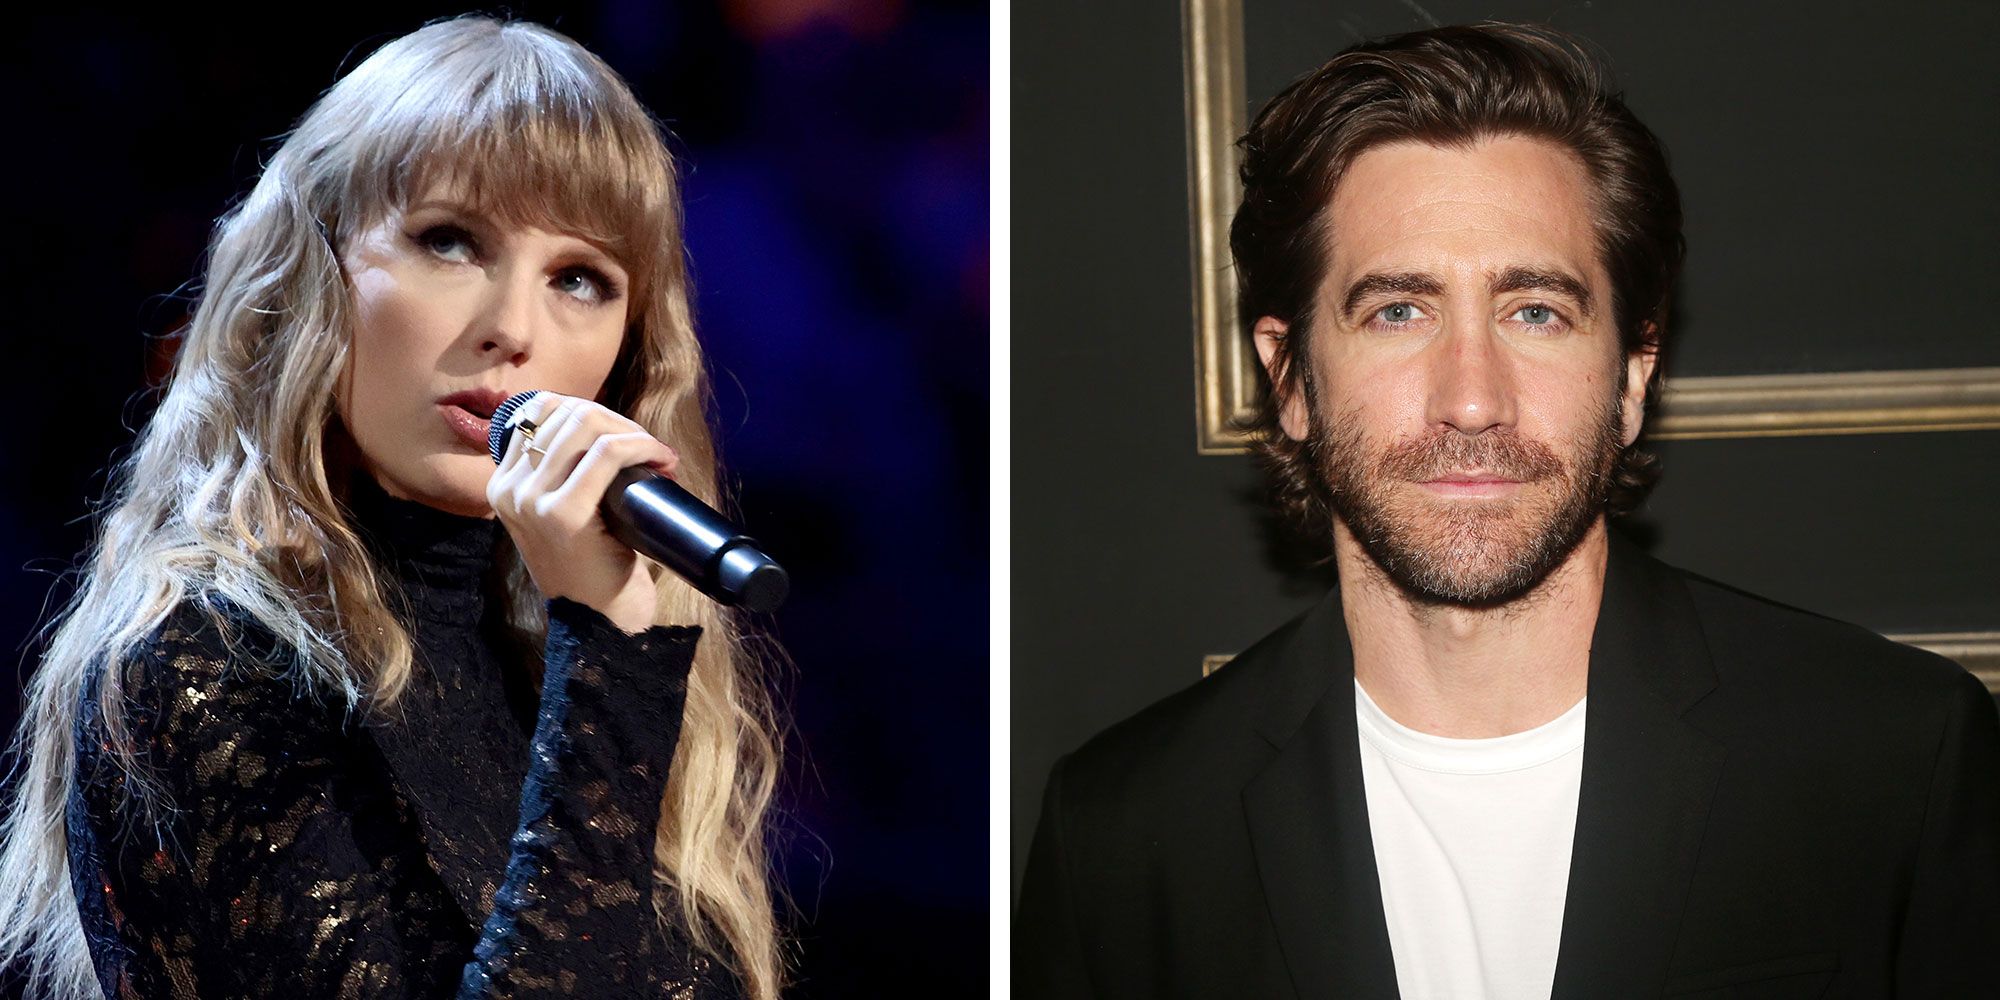 Songs You Probably Didn't Realize Taylor Swift Wrote